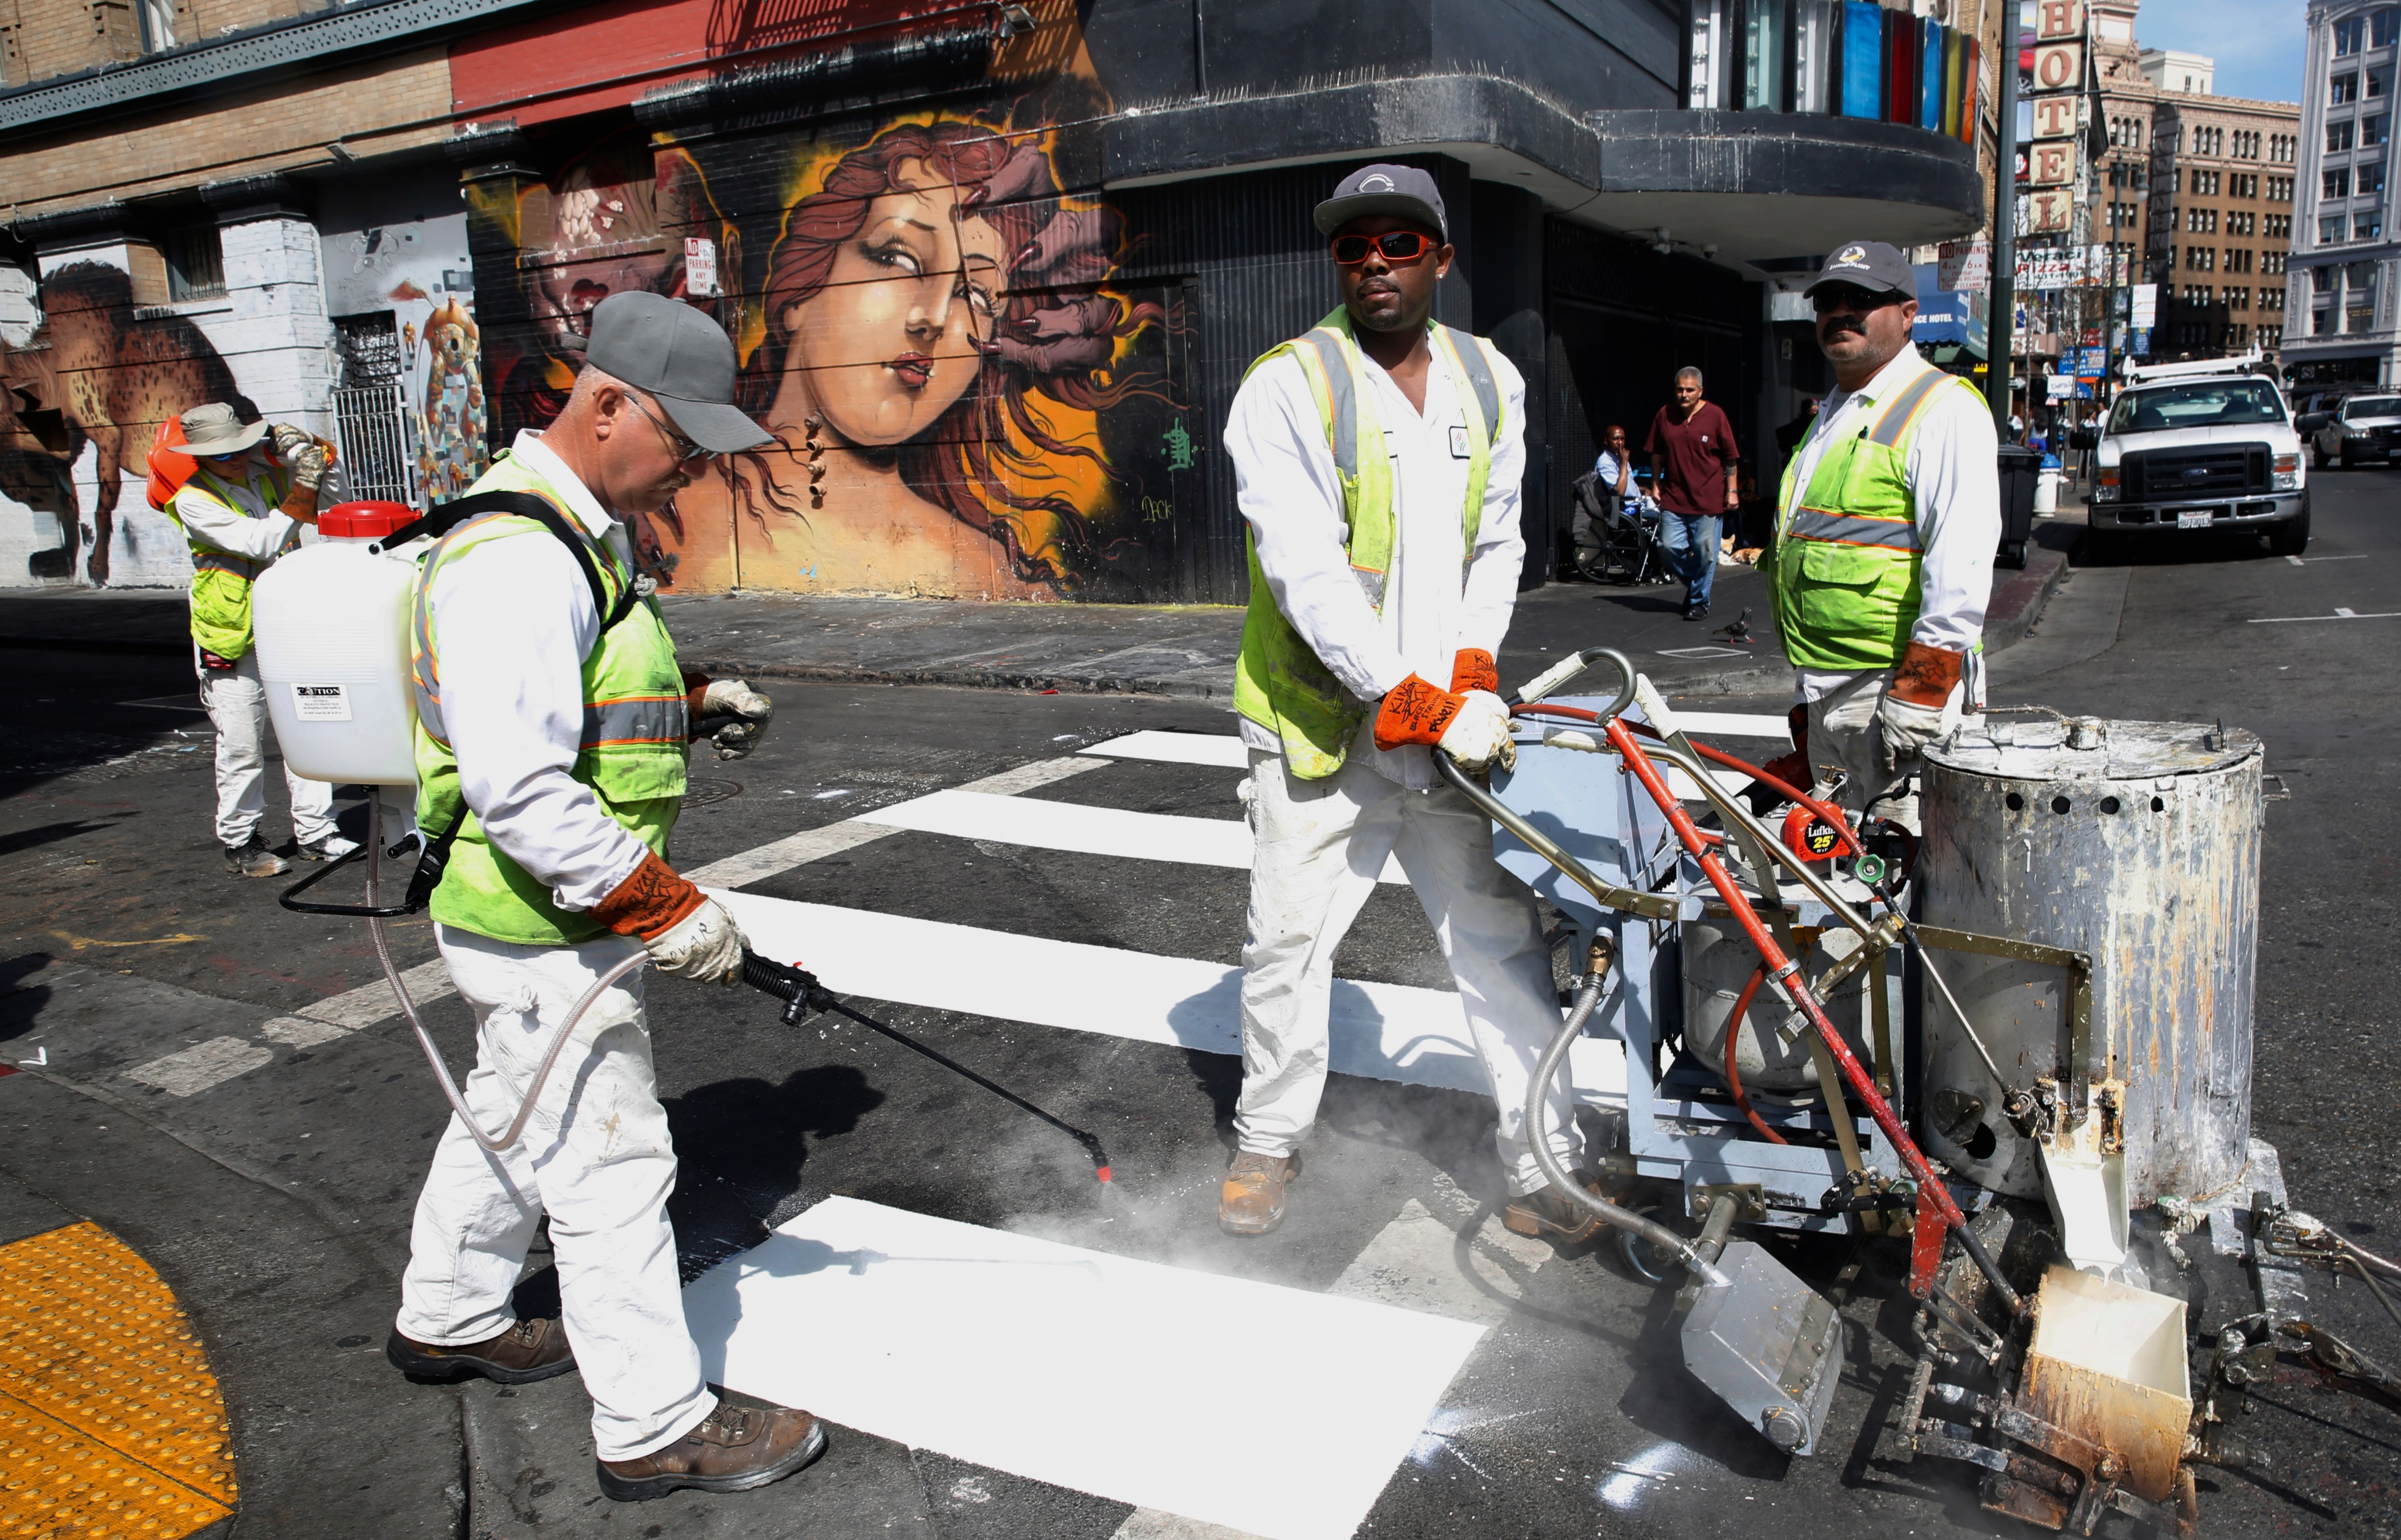 SFMTA workers painting stronger lines for pedestrian walkways on 6th Street at Stevenson.